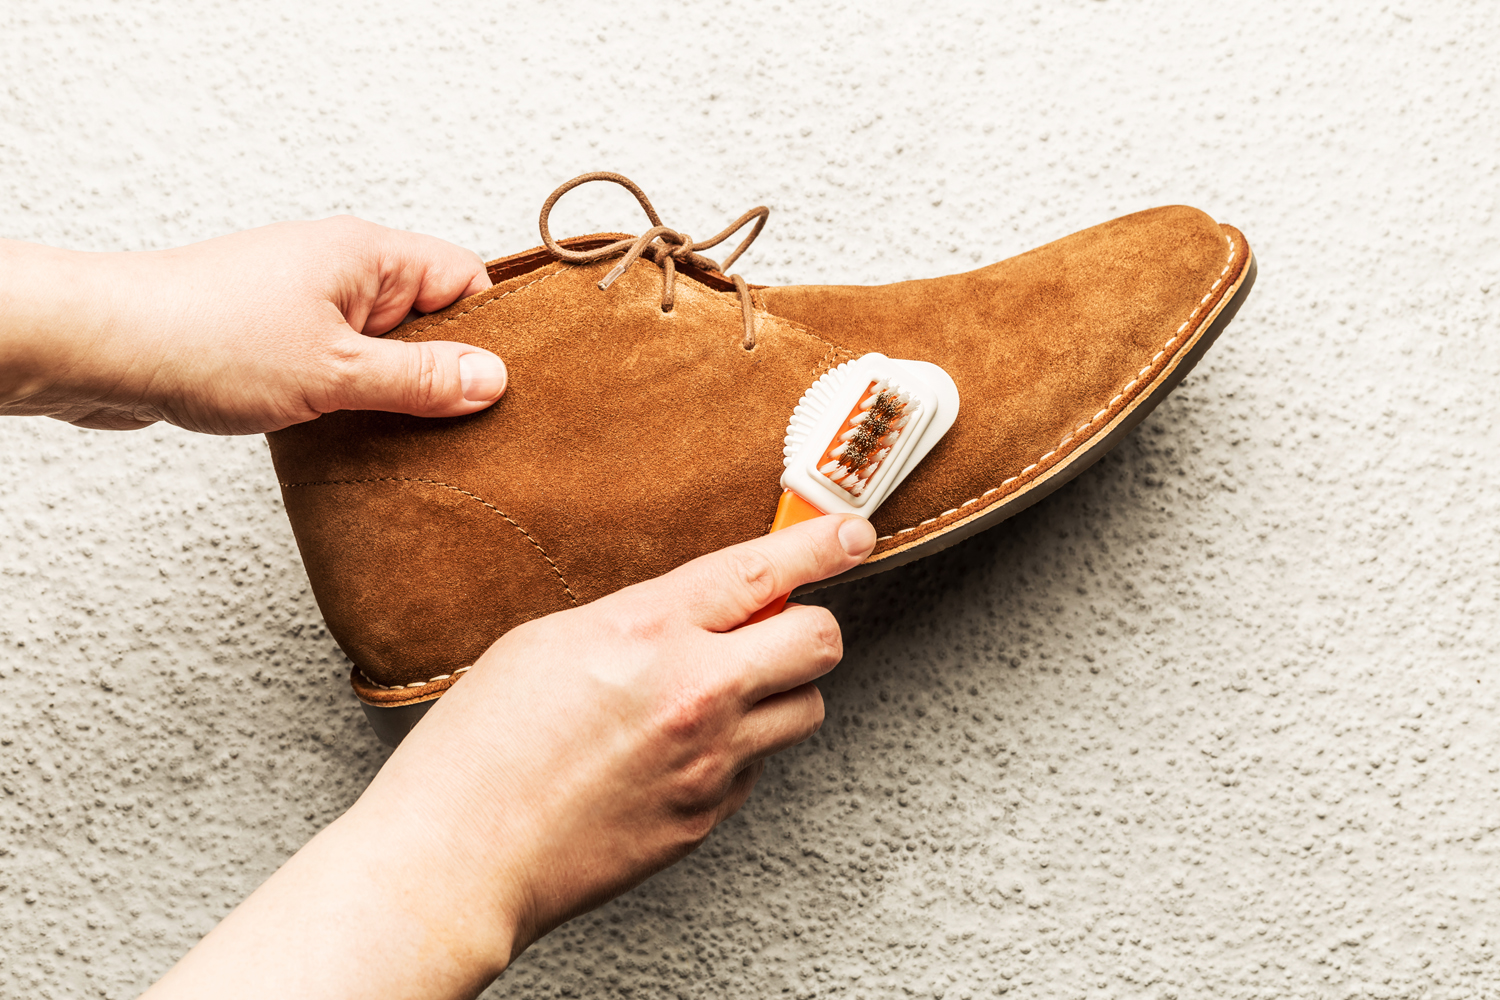 Breeze Wow Upbringing How to Clean Suede Shoes Correctly So They Don't Ruin - The Manual